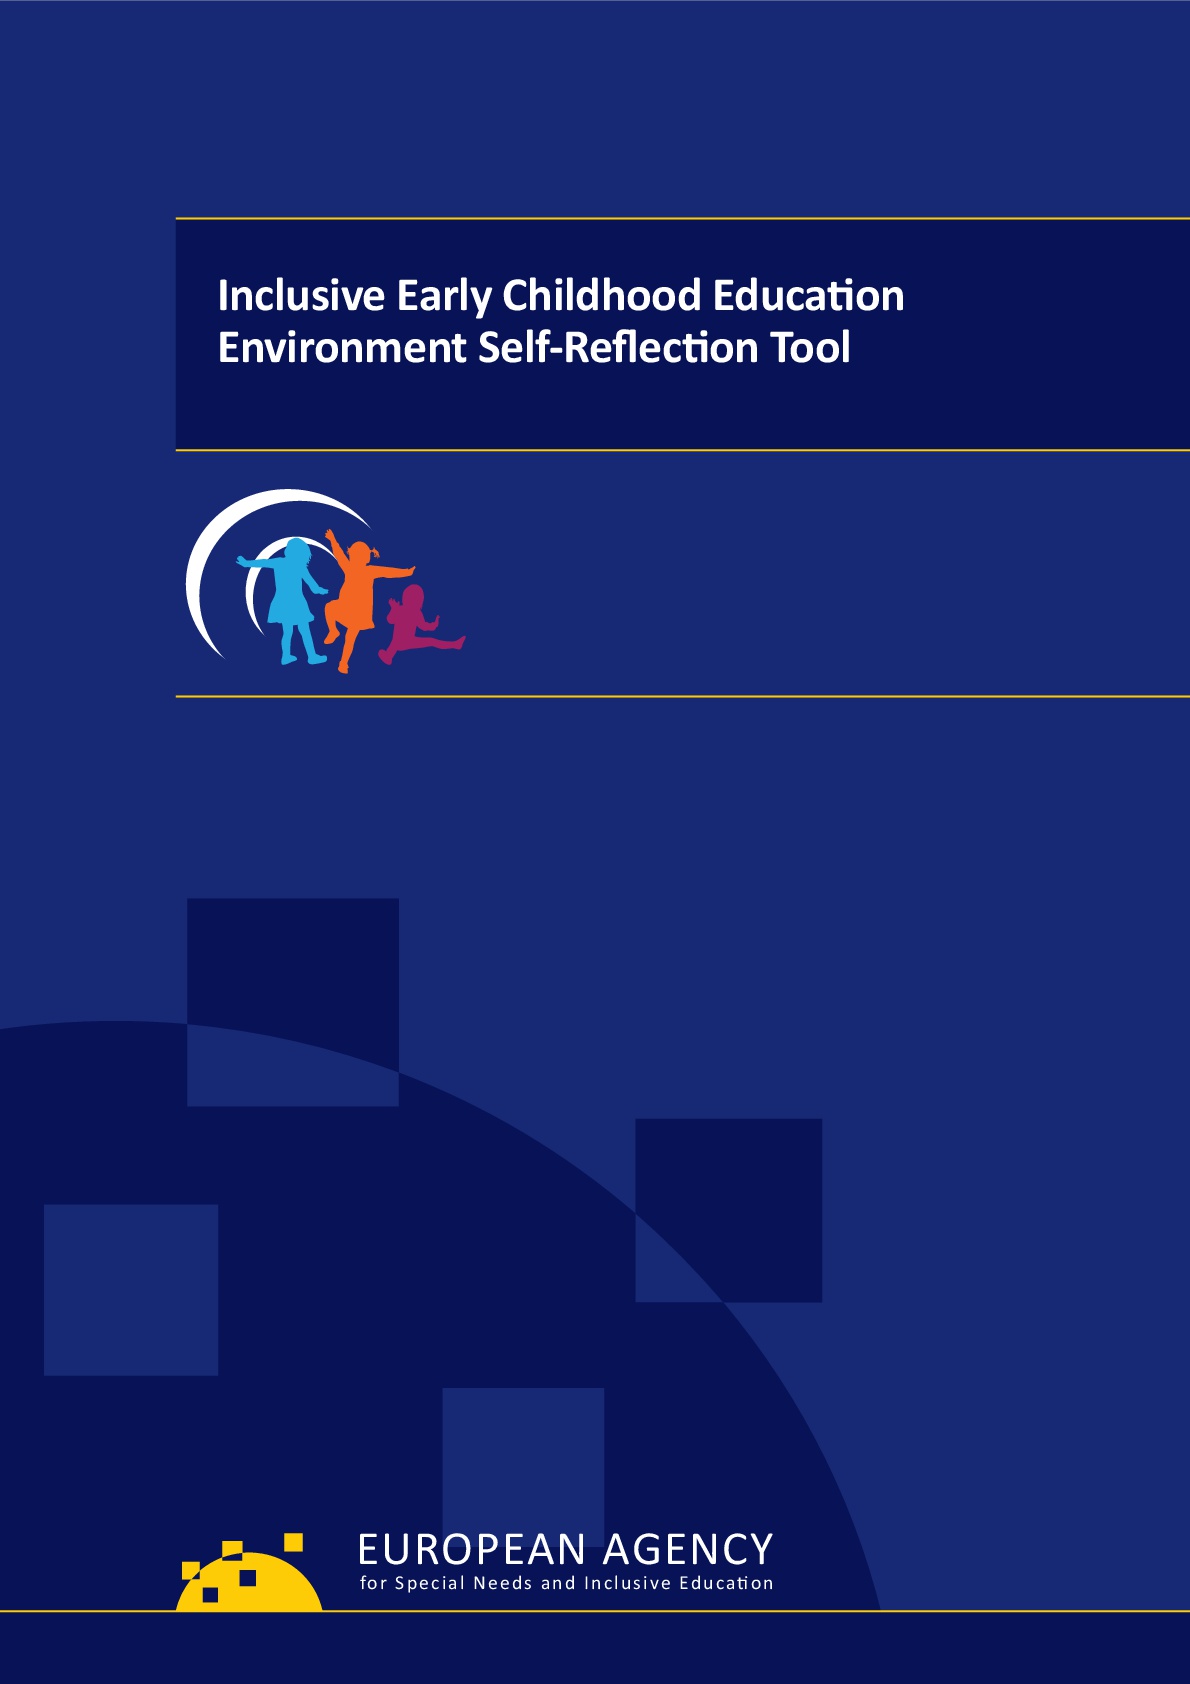 Inclusive Early Childhood Education Environment Self-Reflection Tool